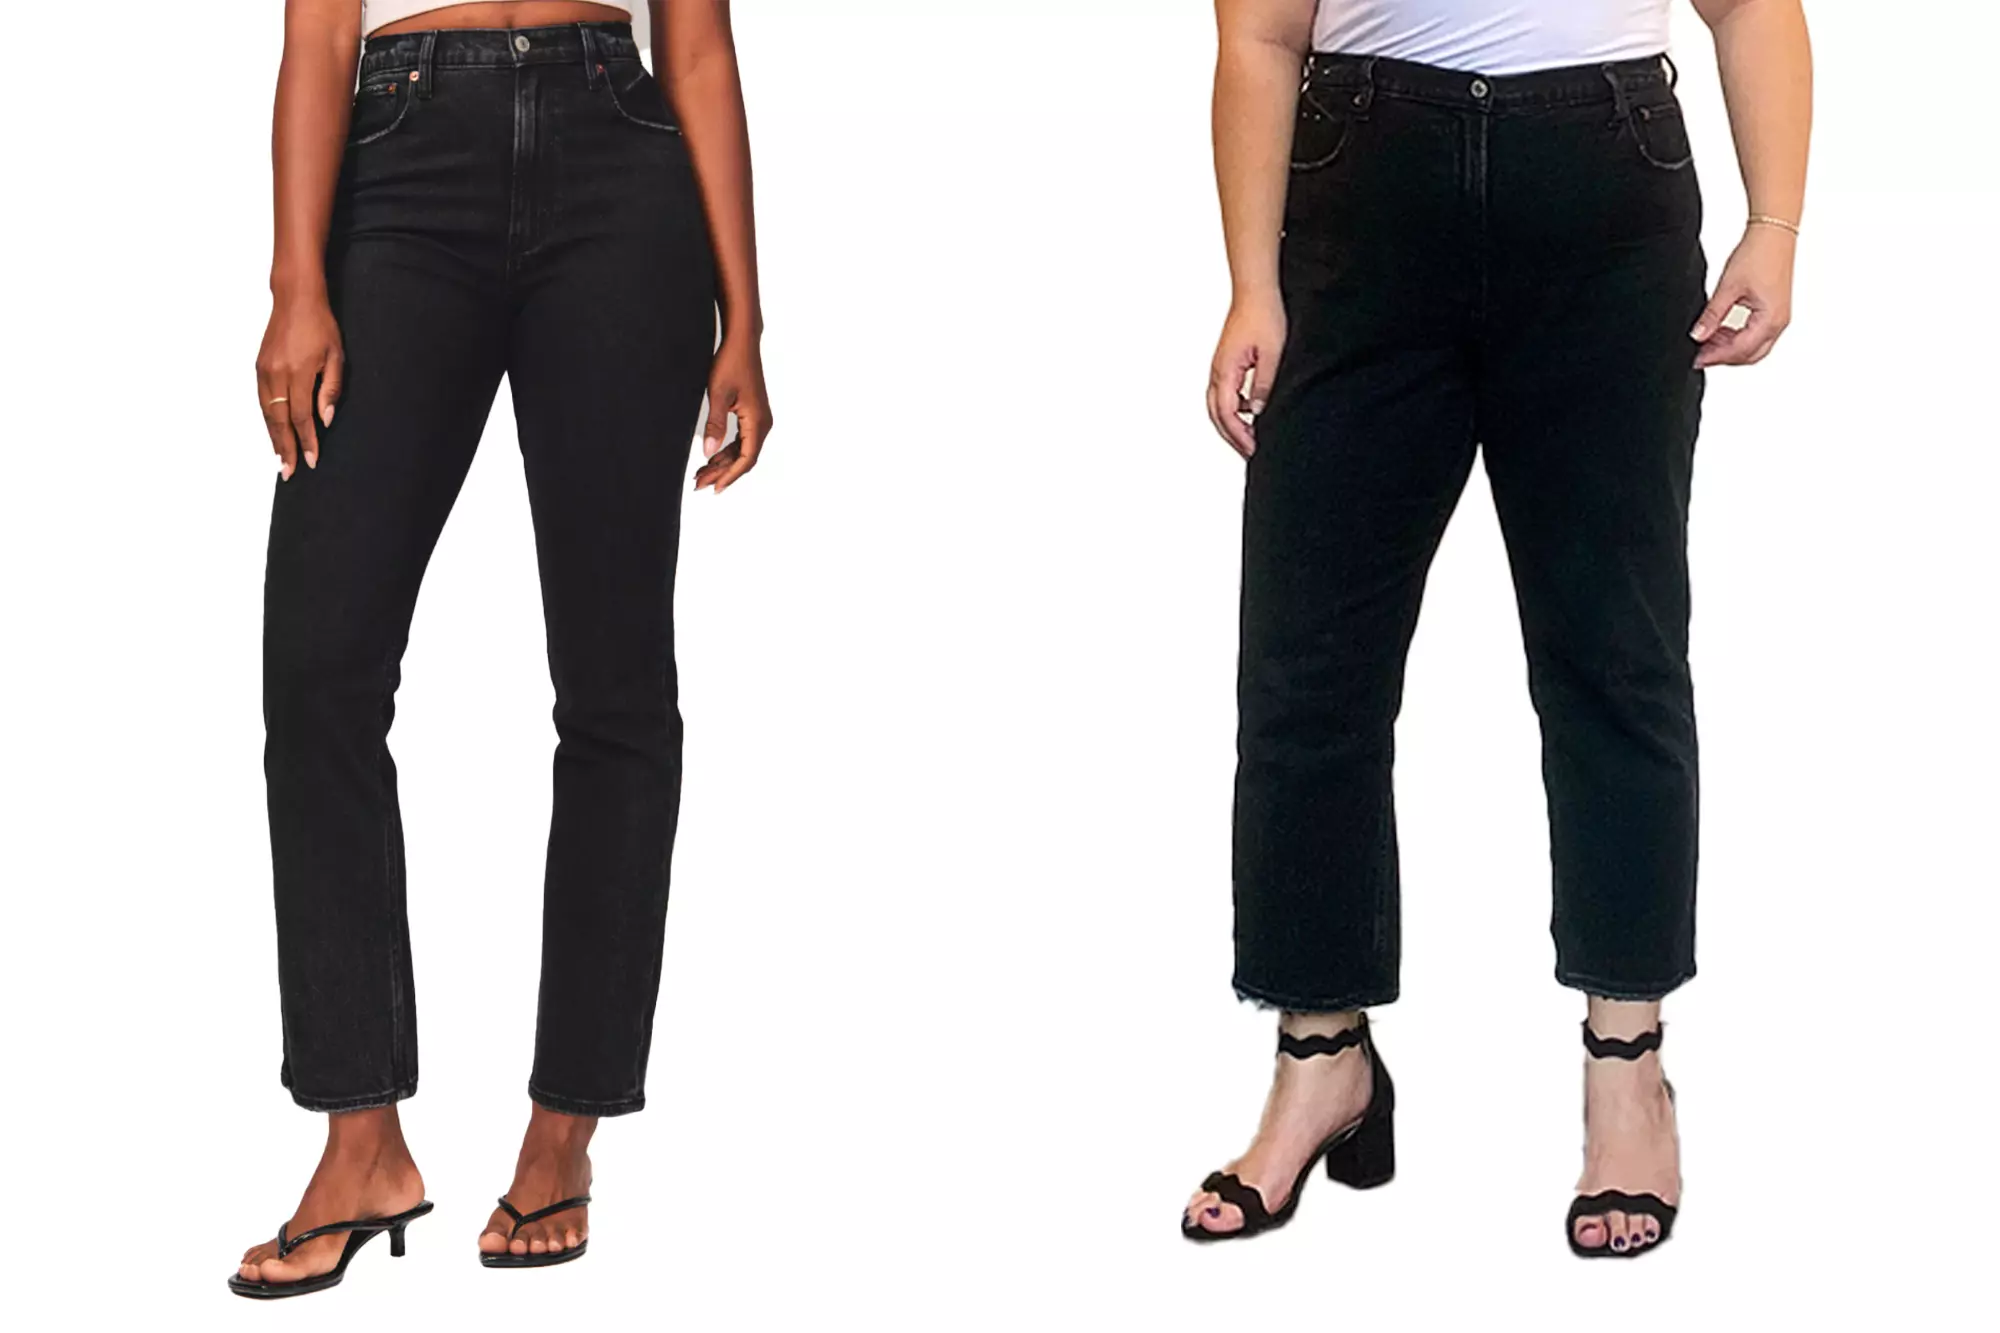 A side by side image of a model in black jeans and a white tank top and Sophie Cannon in the same outfit and pose